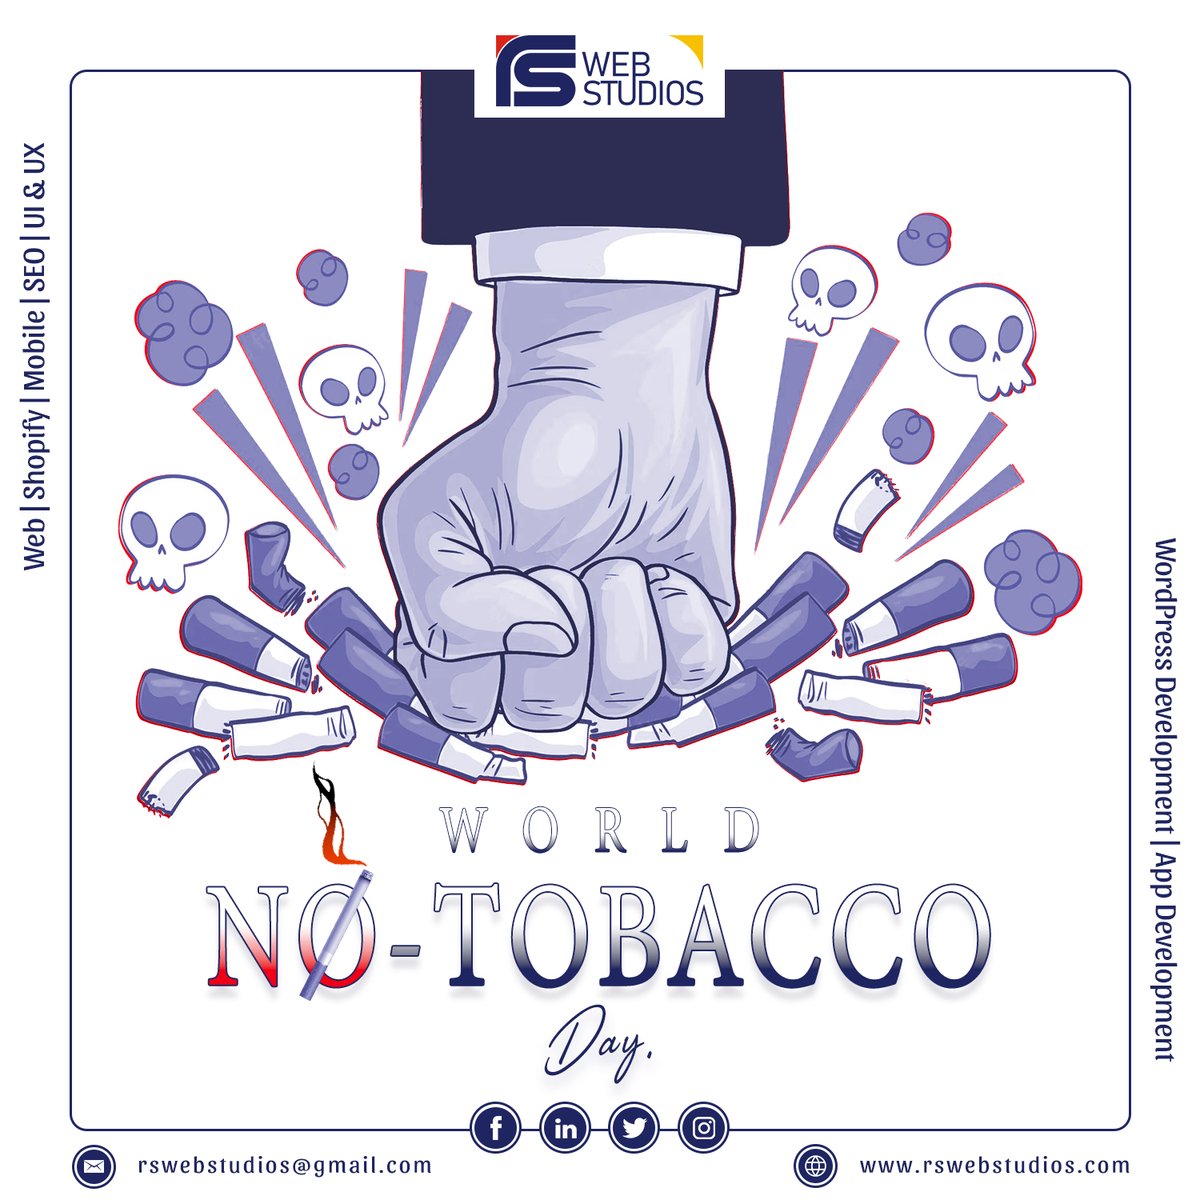 Say no to Tobacco and yes to life to celebrate this day with high spirits-'World No Tobacco Day'

#WorldNoTobaccoDay #WorldNoTobaccoDay2023  #NoTobacco #NoTobaccoDay @MoHFW_INDIA  #QuitSmoking  #wordpress #bhfyp  #WordPresssupport #webdevelopment #shopifystore #rswebstudios